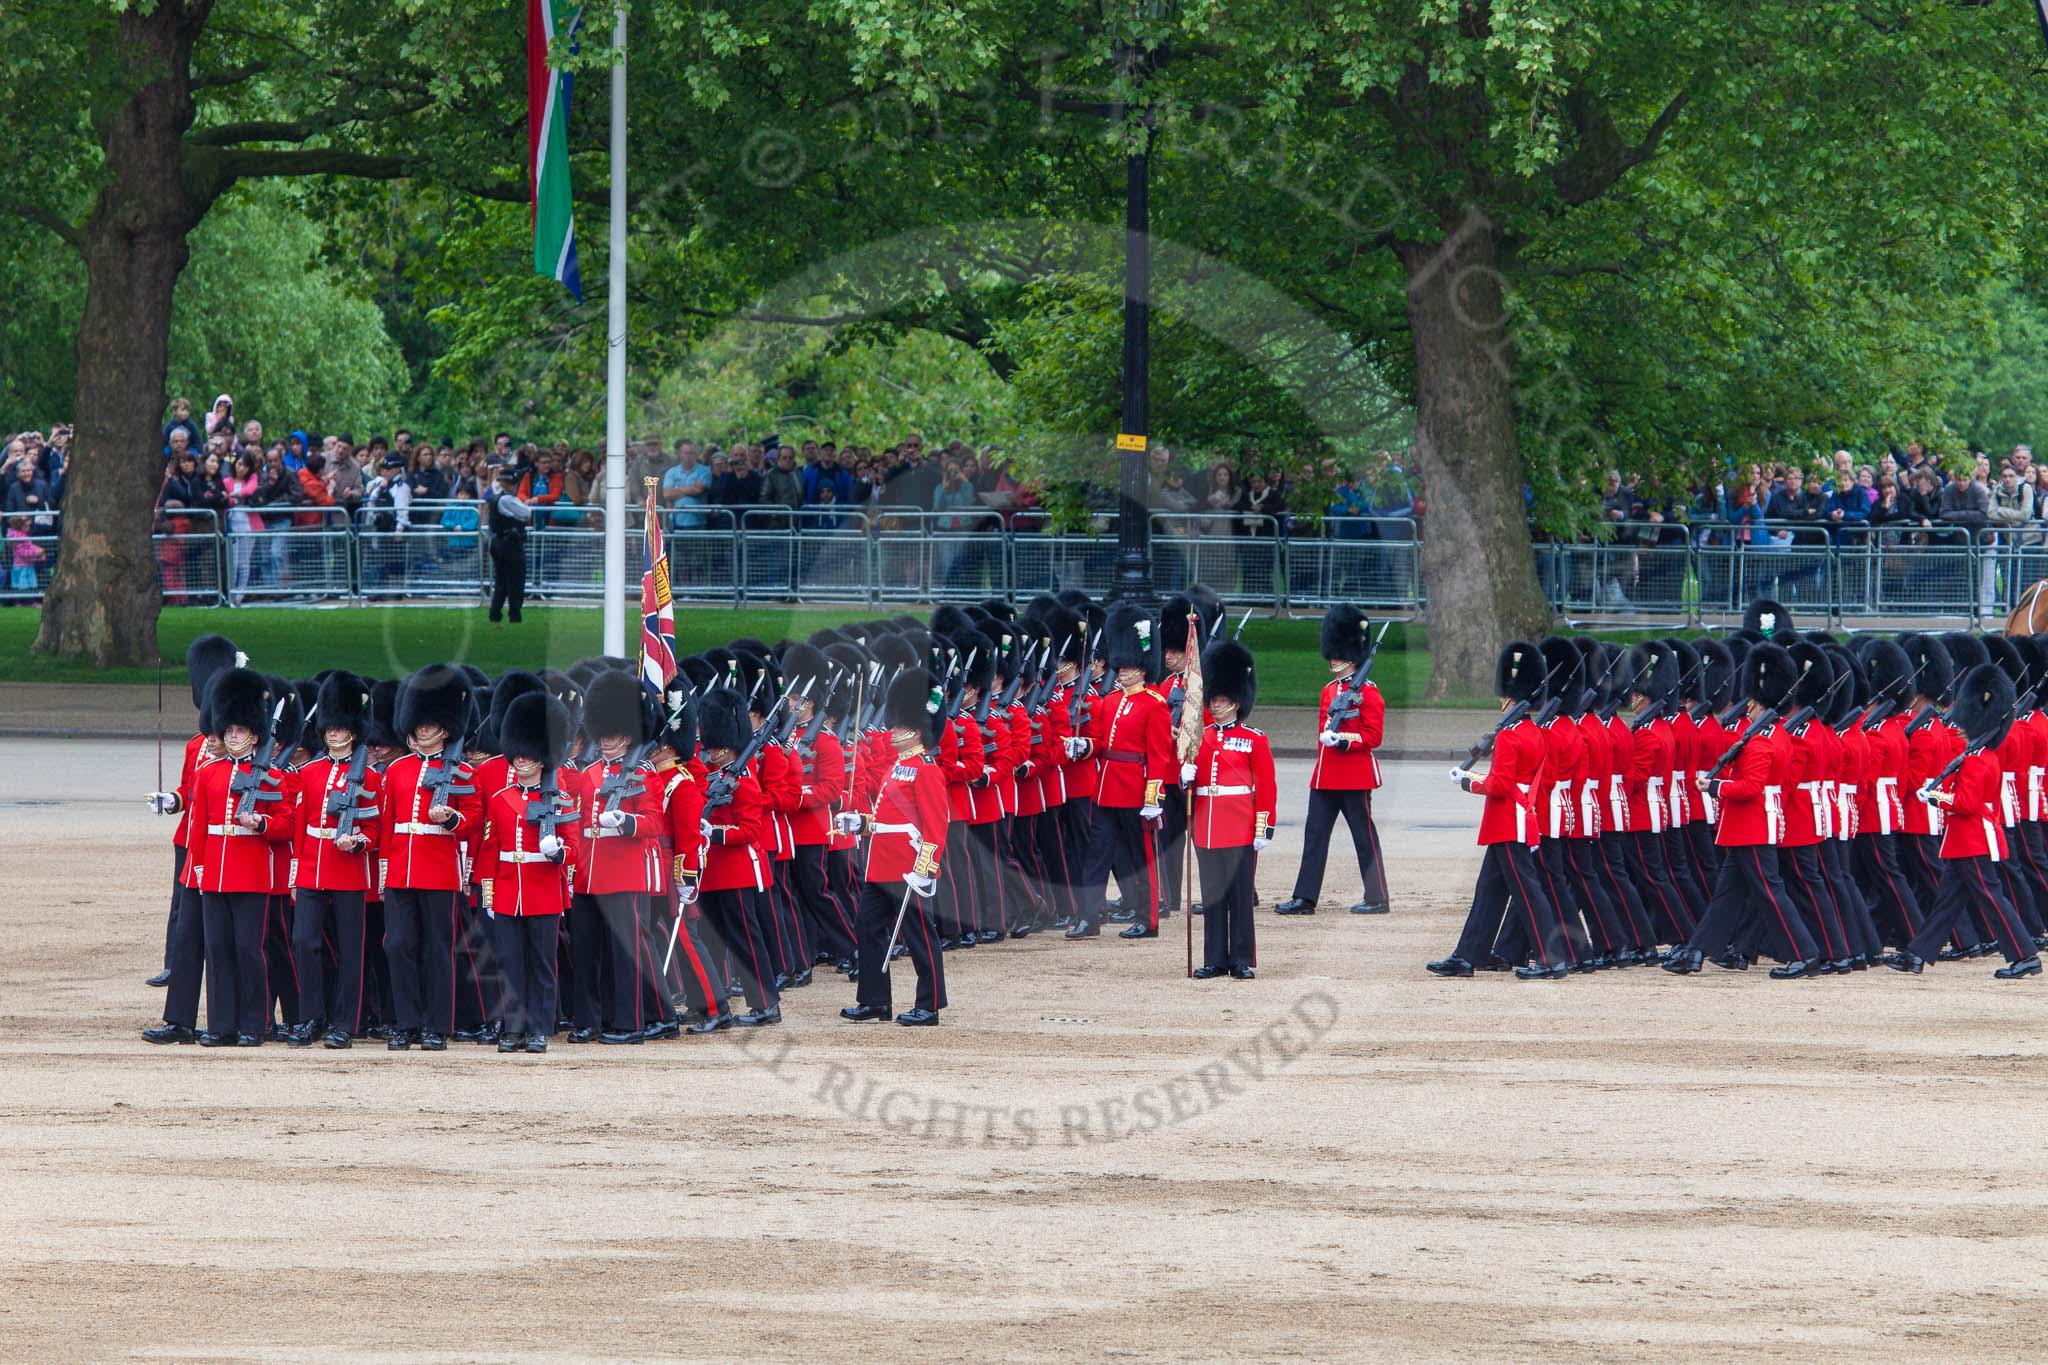 Major General's Review 2013: The March Past in Slow Time - Field Officer and Major of the Parade leading the six guards around Horse Guards Parade..
Horse Guards Parade, Westminster,
London SW1,

United Kingdom,
on 01 June 2013 at 11:30, image #462